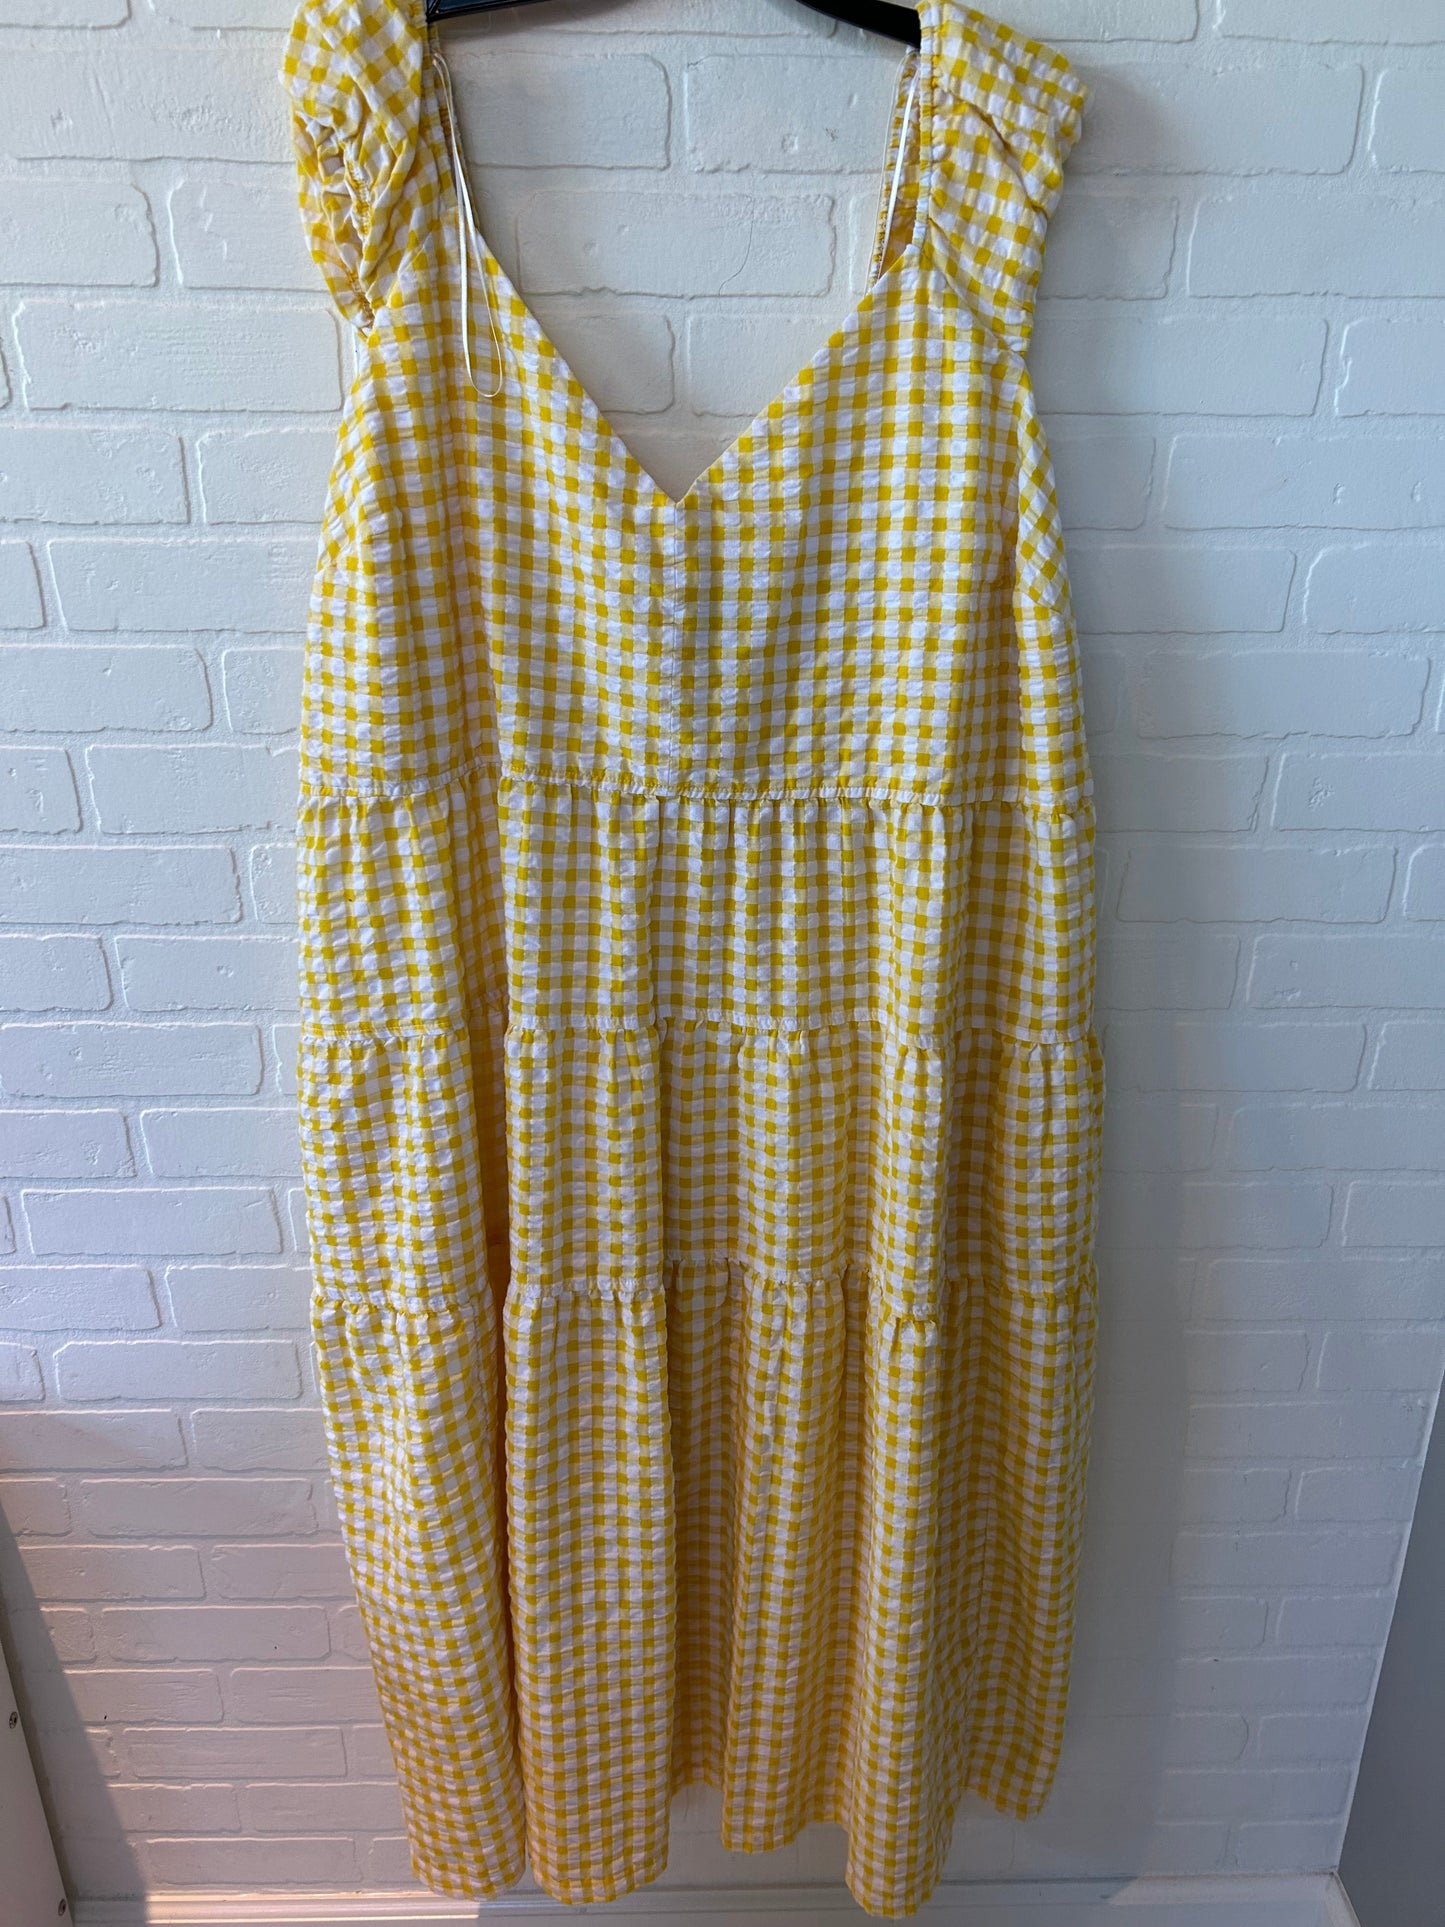 White & Yellow Dress Casual Maxi Old Navy, Size 4x